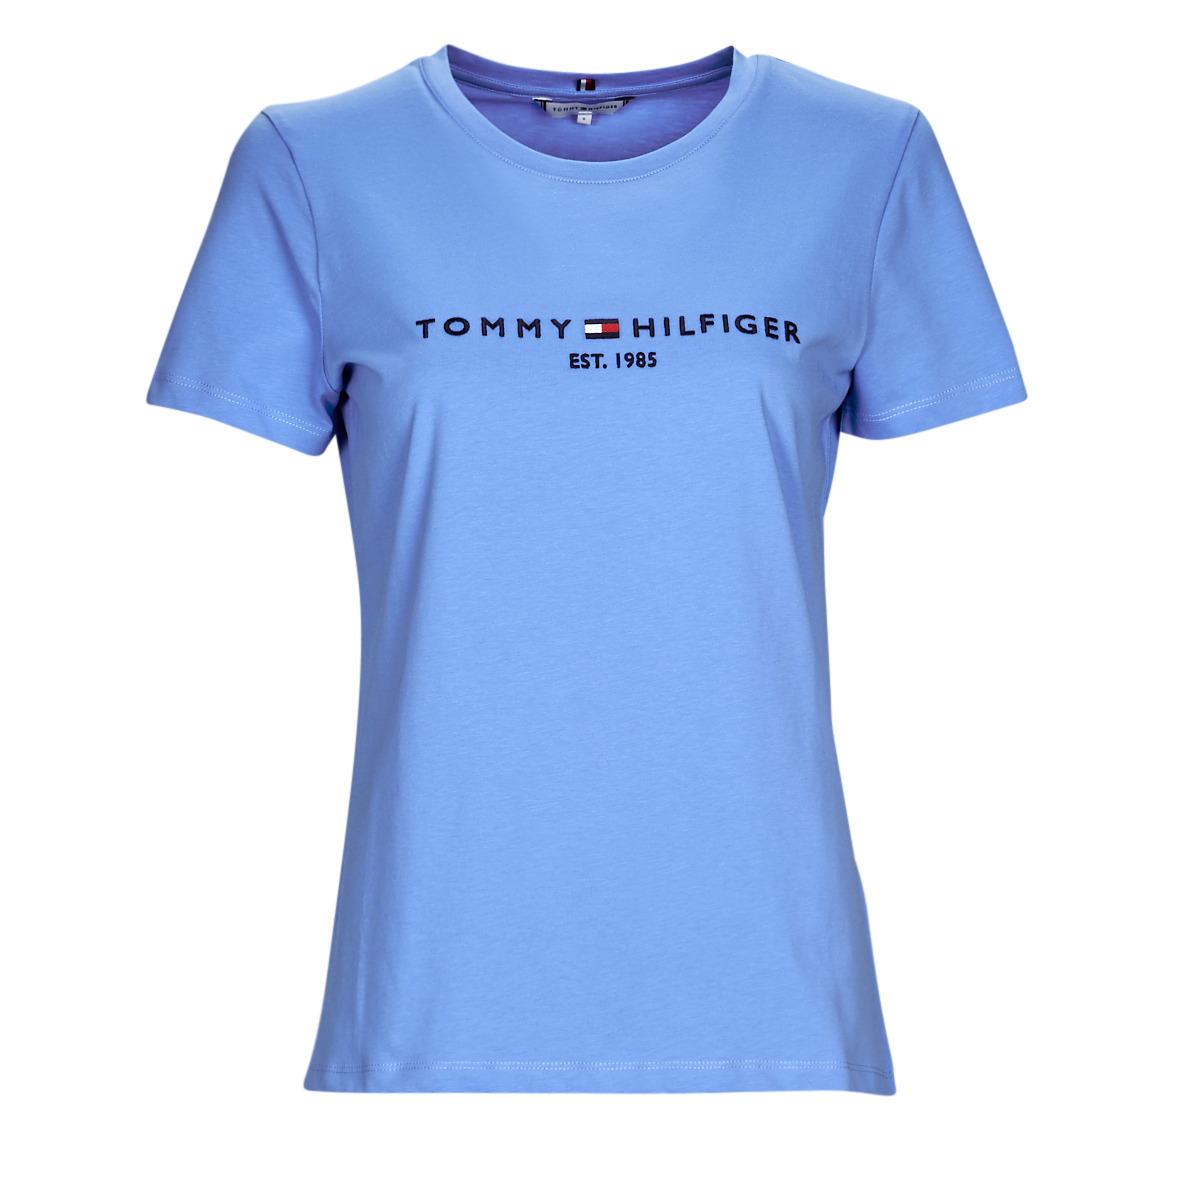 Tommy Hilfiger REGULAR HILFIGER C-NK TEE SS Blue - Free delivery | Spartoo  NET ! - Clothing short-sleeved t-shirts Women